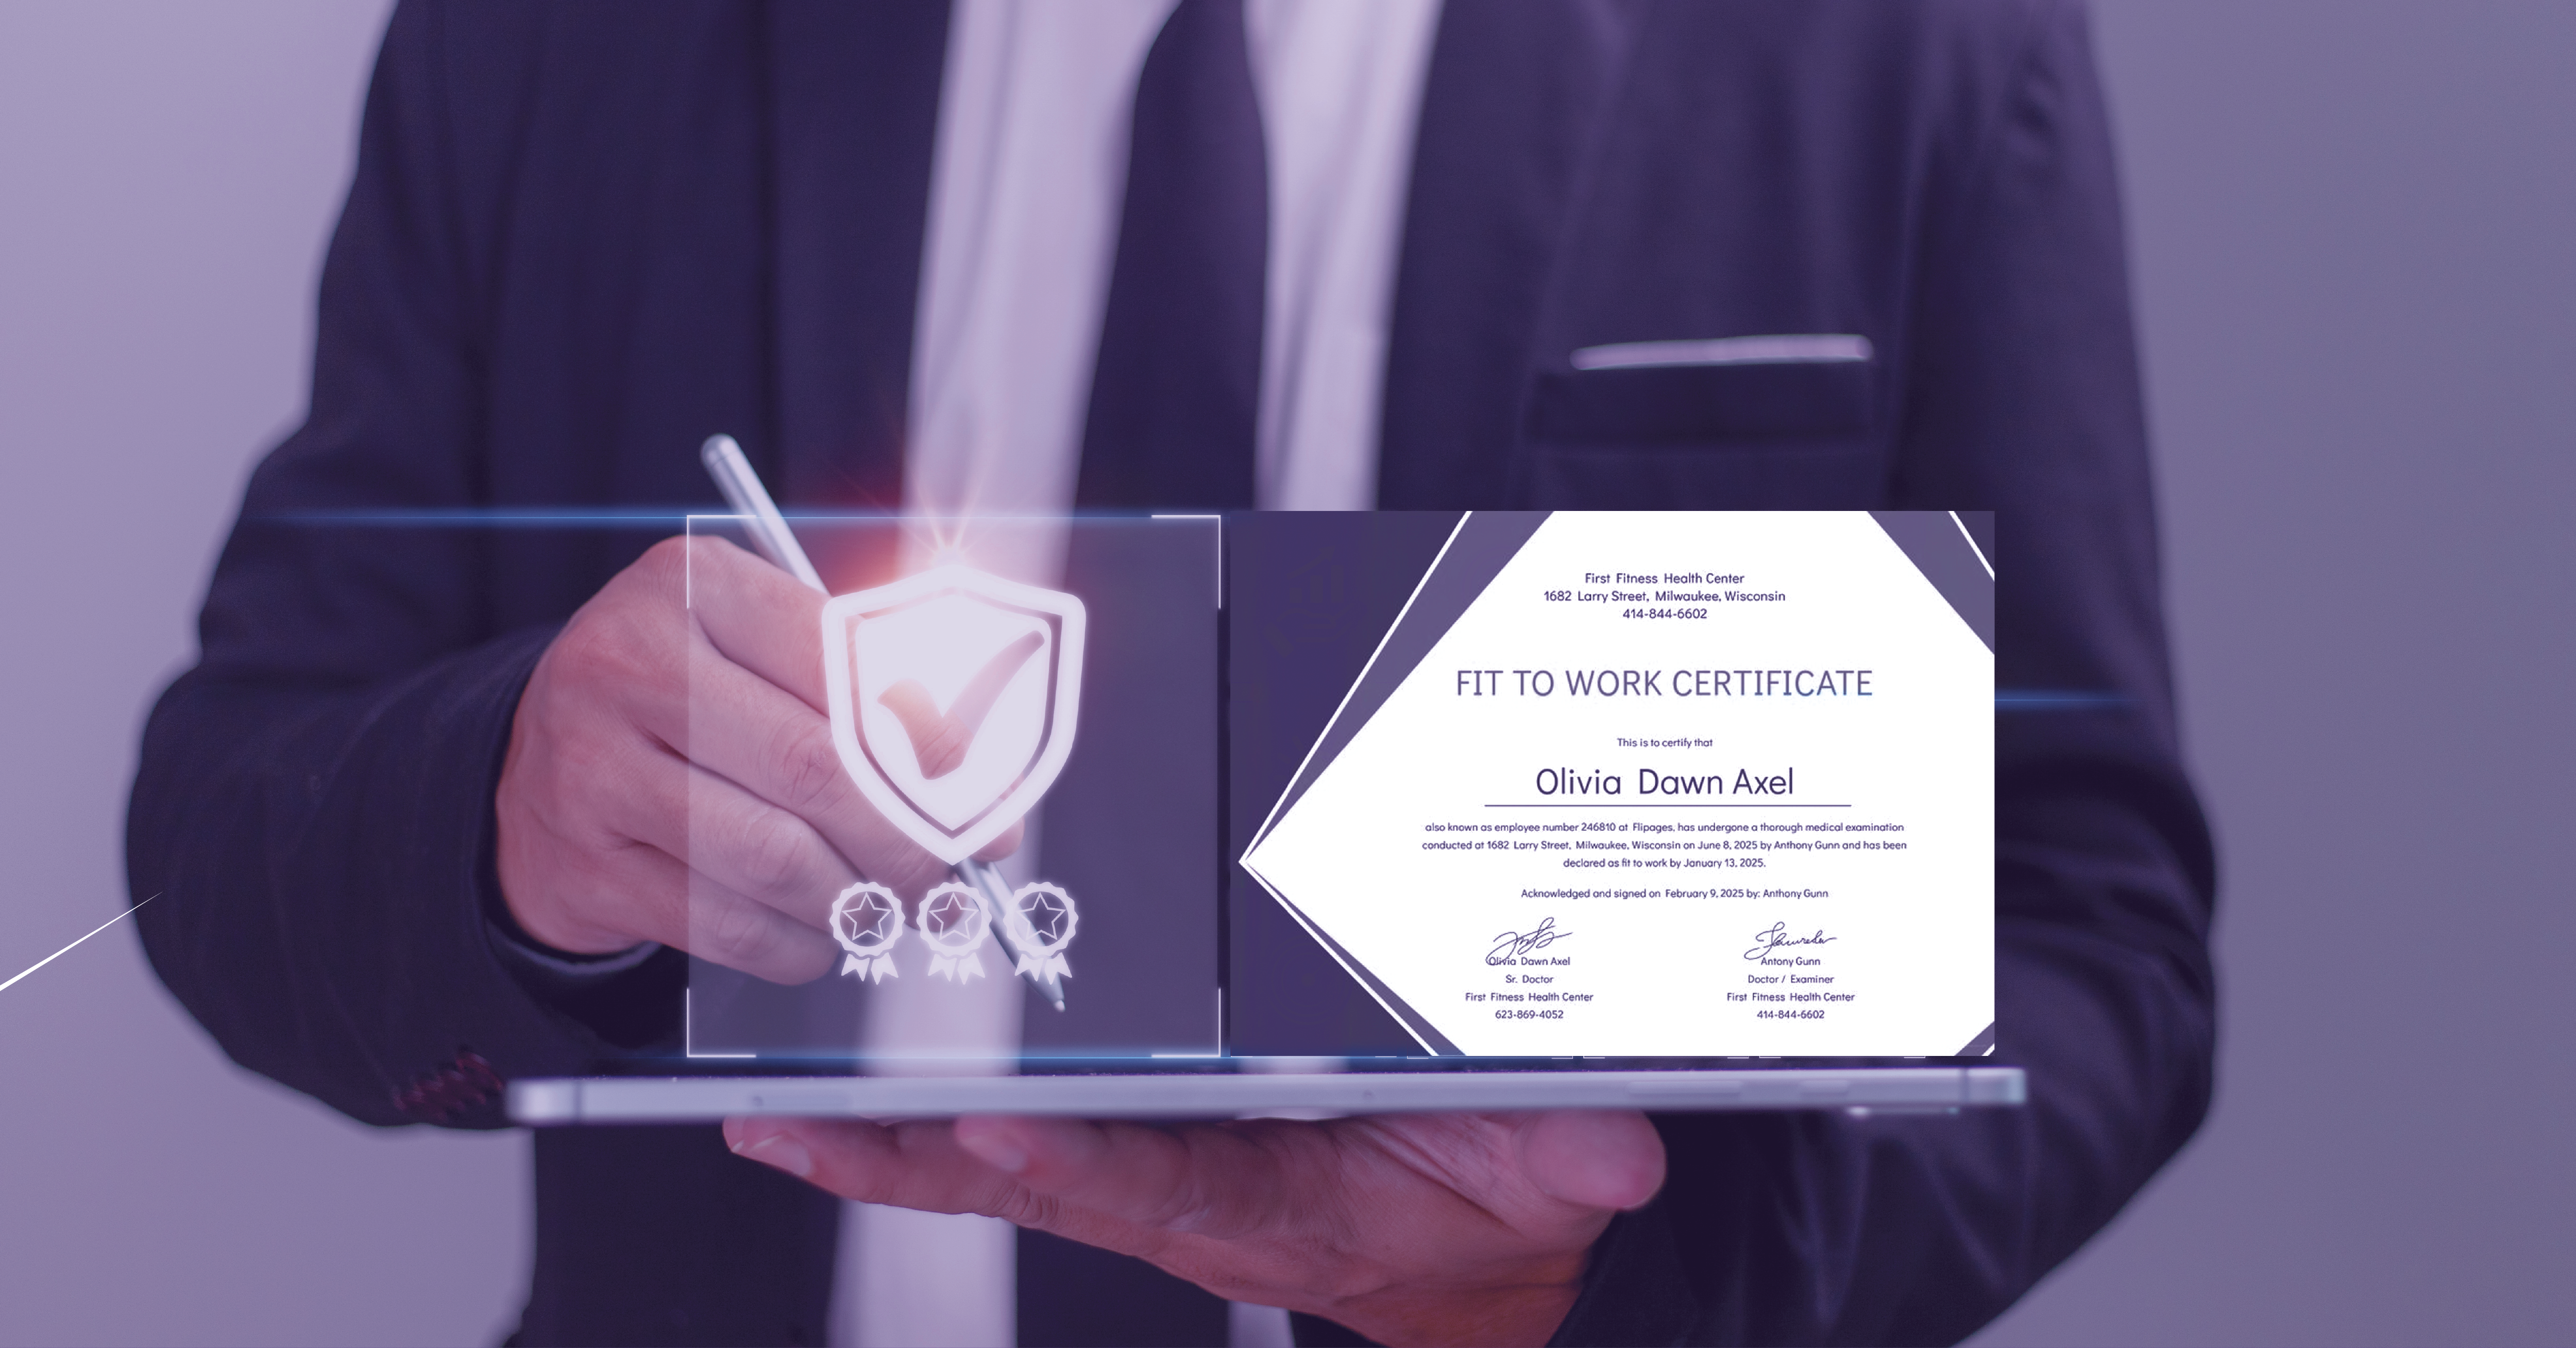 How Digital Credentials Build Trust and Increase Businesses’ Productivity